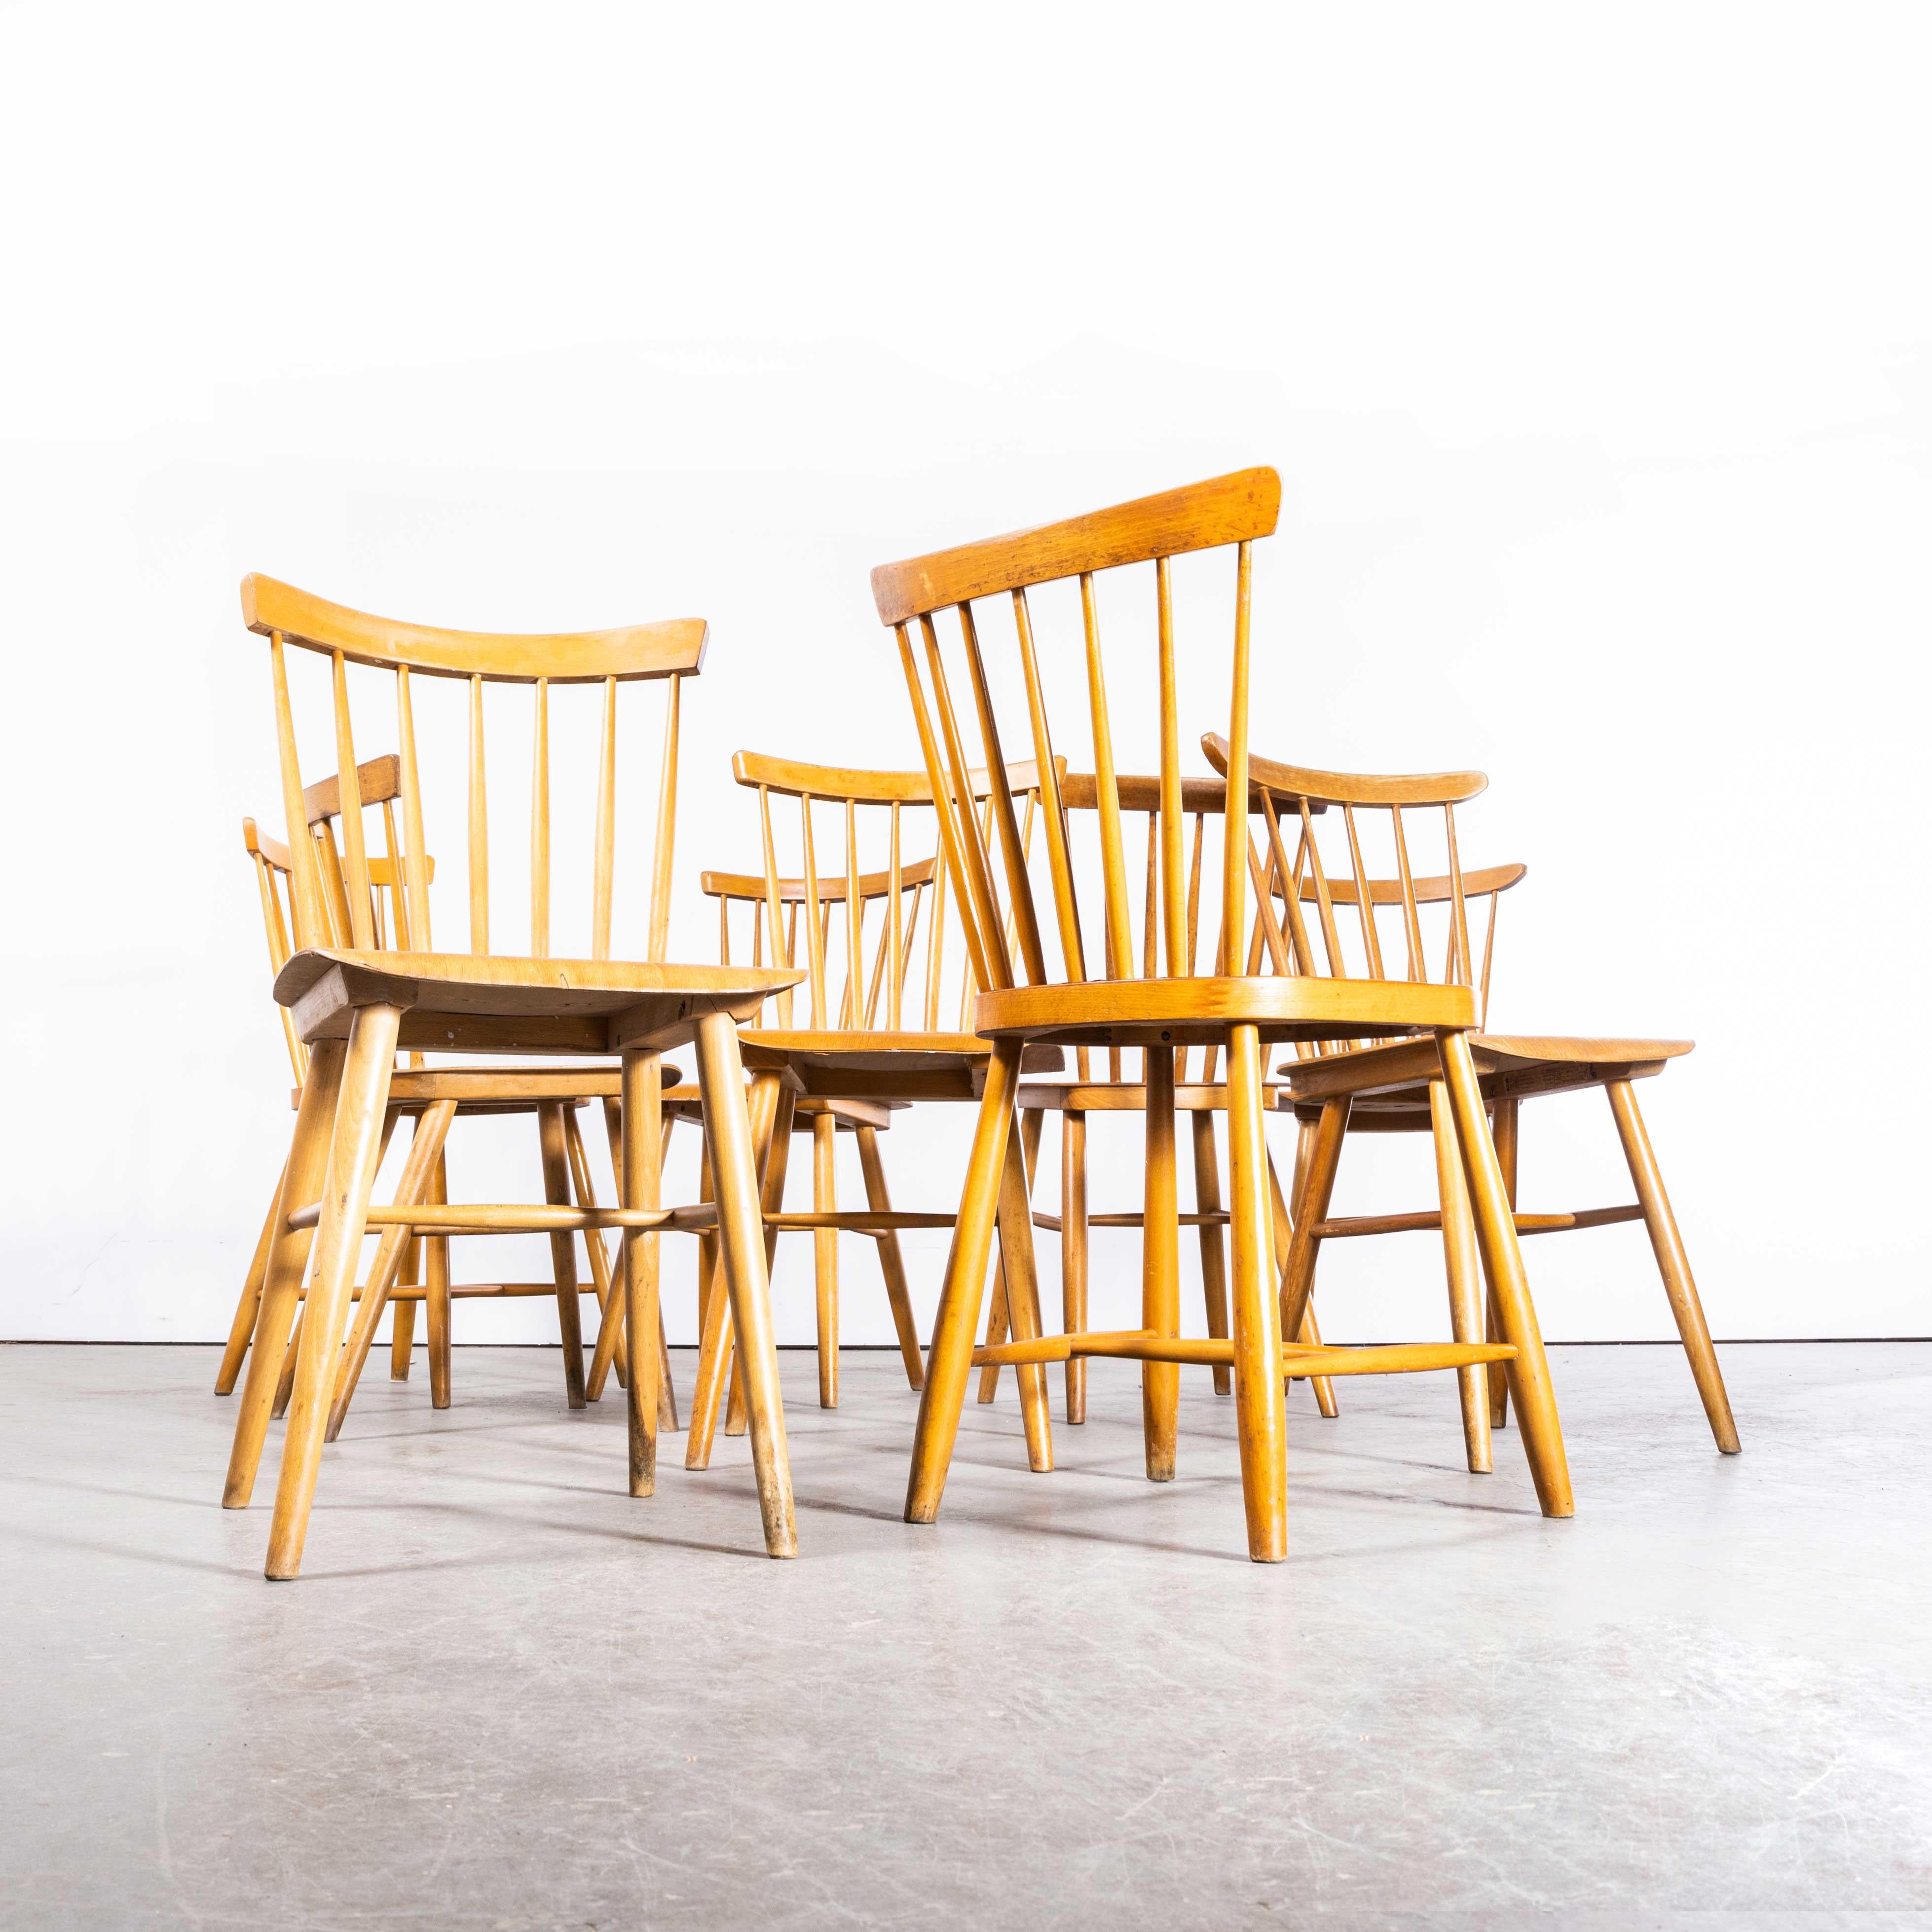 1950s Harlequin Stickback Dining Chairs By Ton – Set Of Nine
1950s Harlequin Stickback Dining Chairs By Ton – Set Of Nine. These chairs were produced by the famous Czech firm Ton, a post war spin off from the famous Thonet factory that was carved